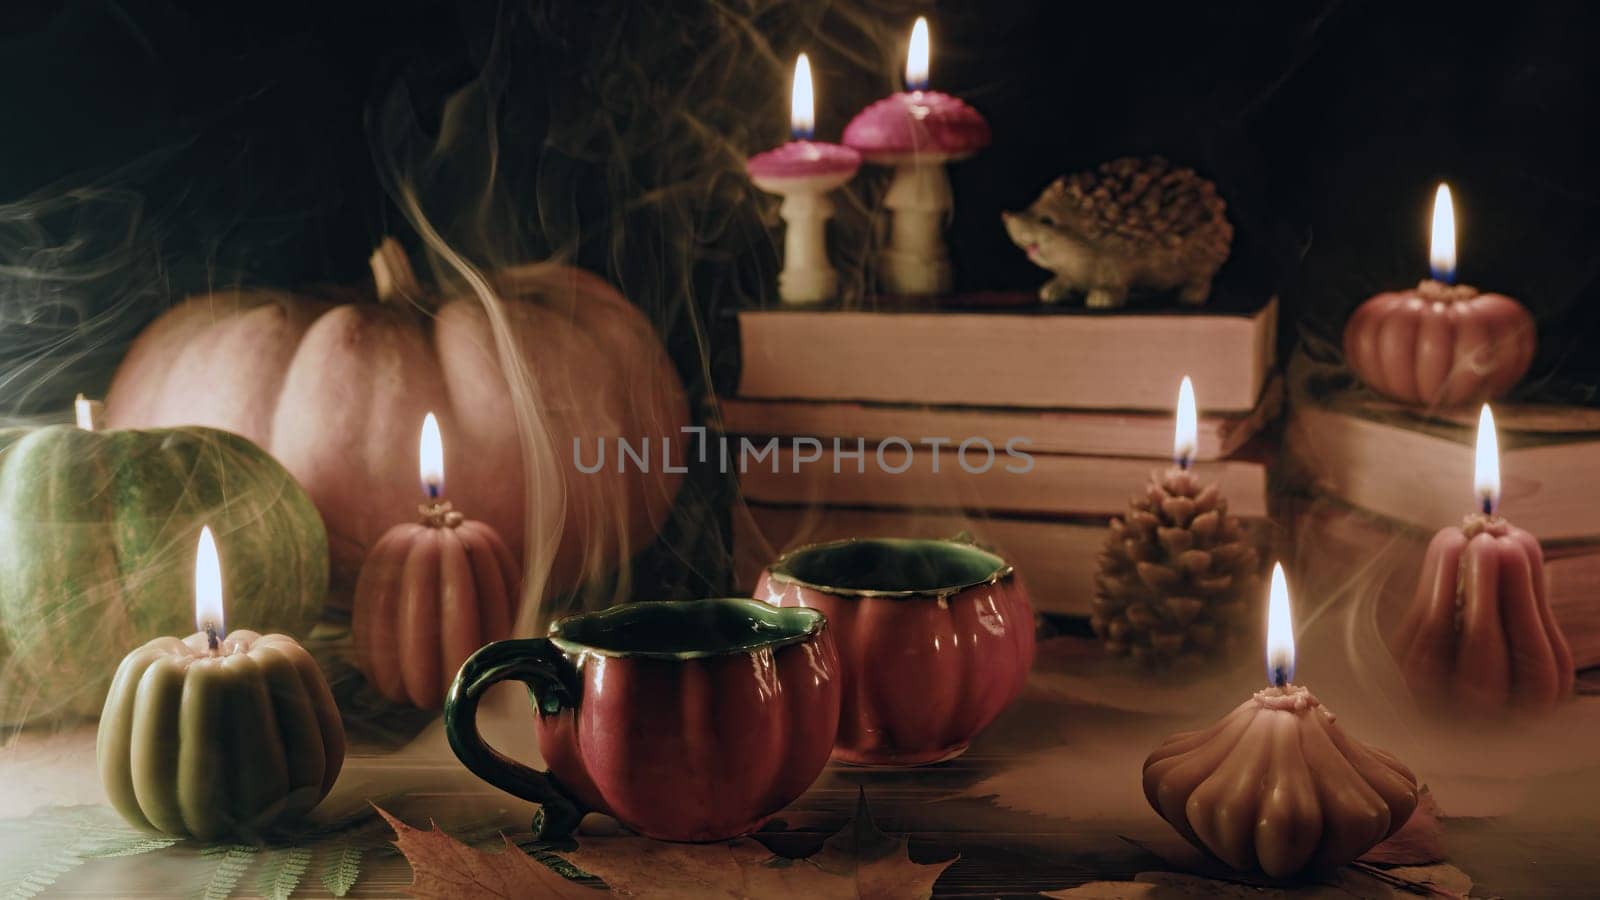 Cute cups of tea among pumpkin candles. Autumn-themed content, cafe promotions or visual storytelling that exudes comfort. Touch of intimacy, tranquil and inviting atmosphere.